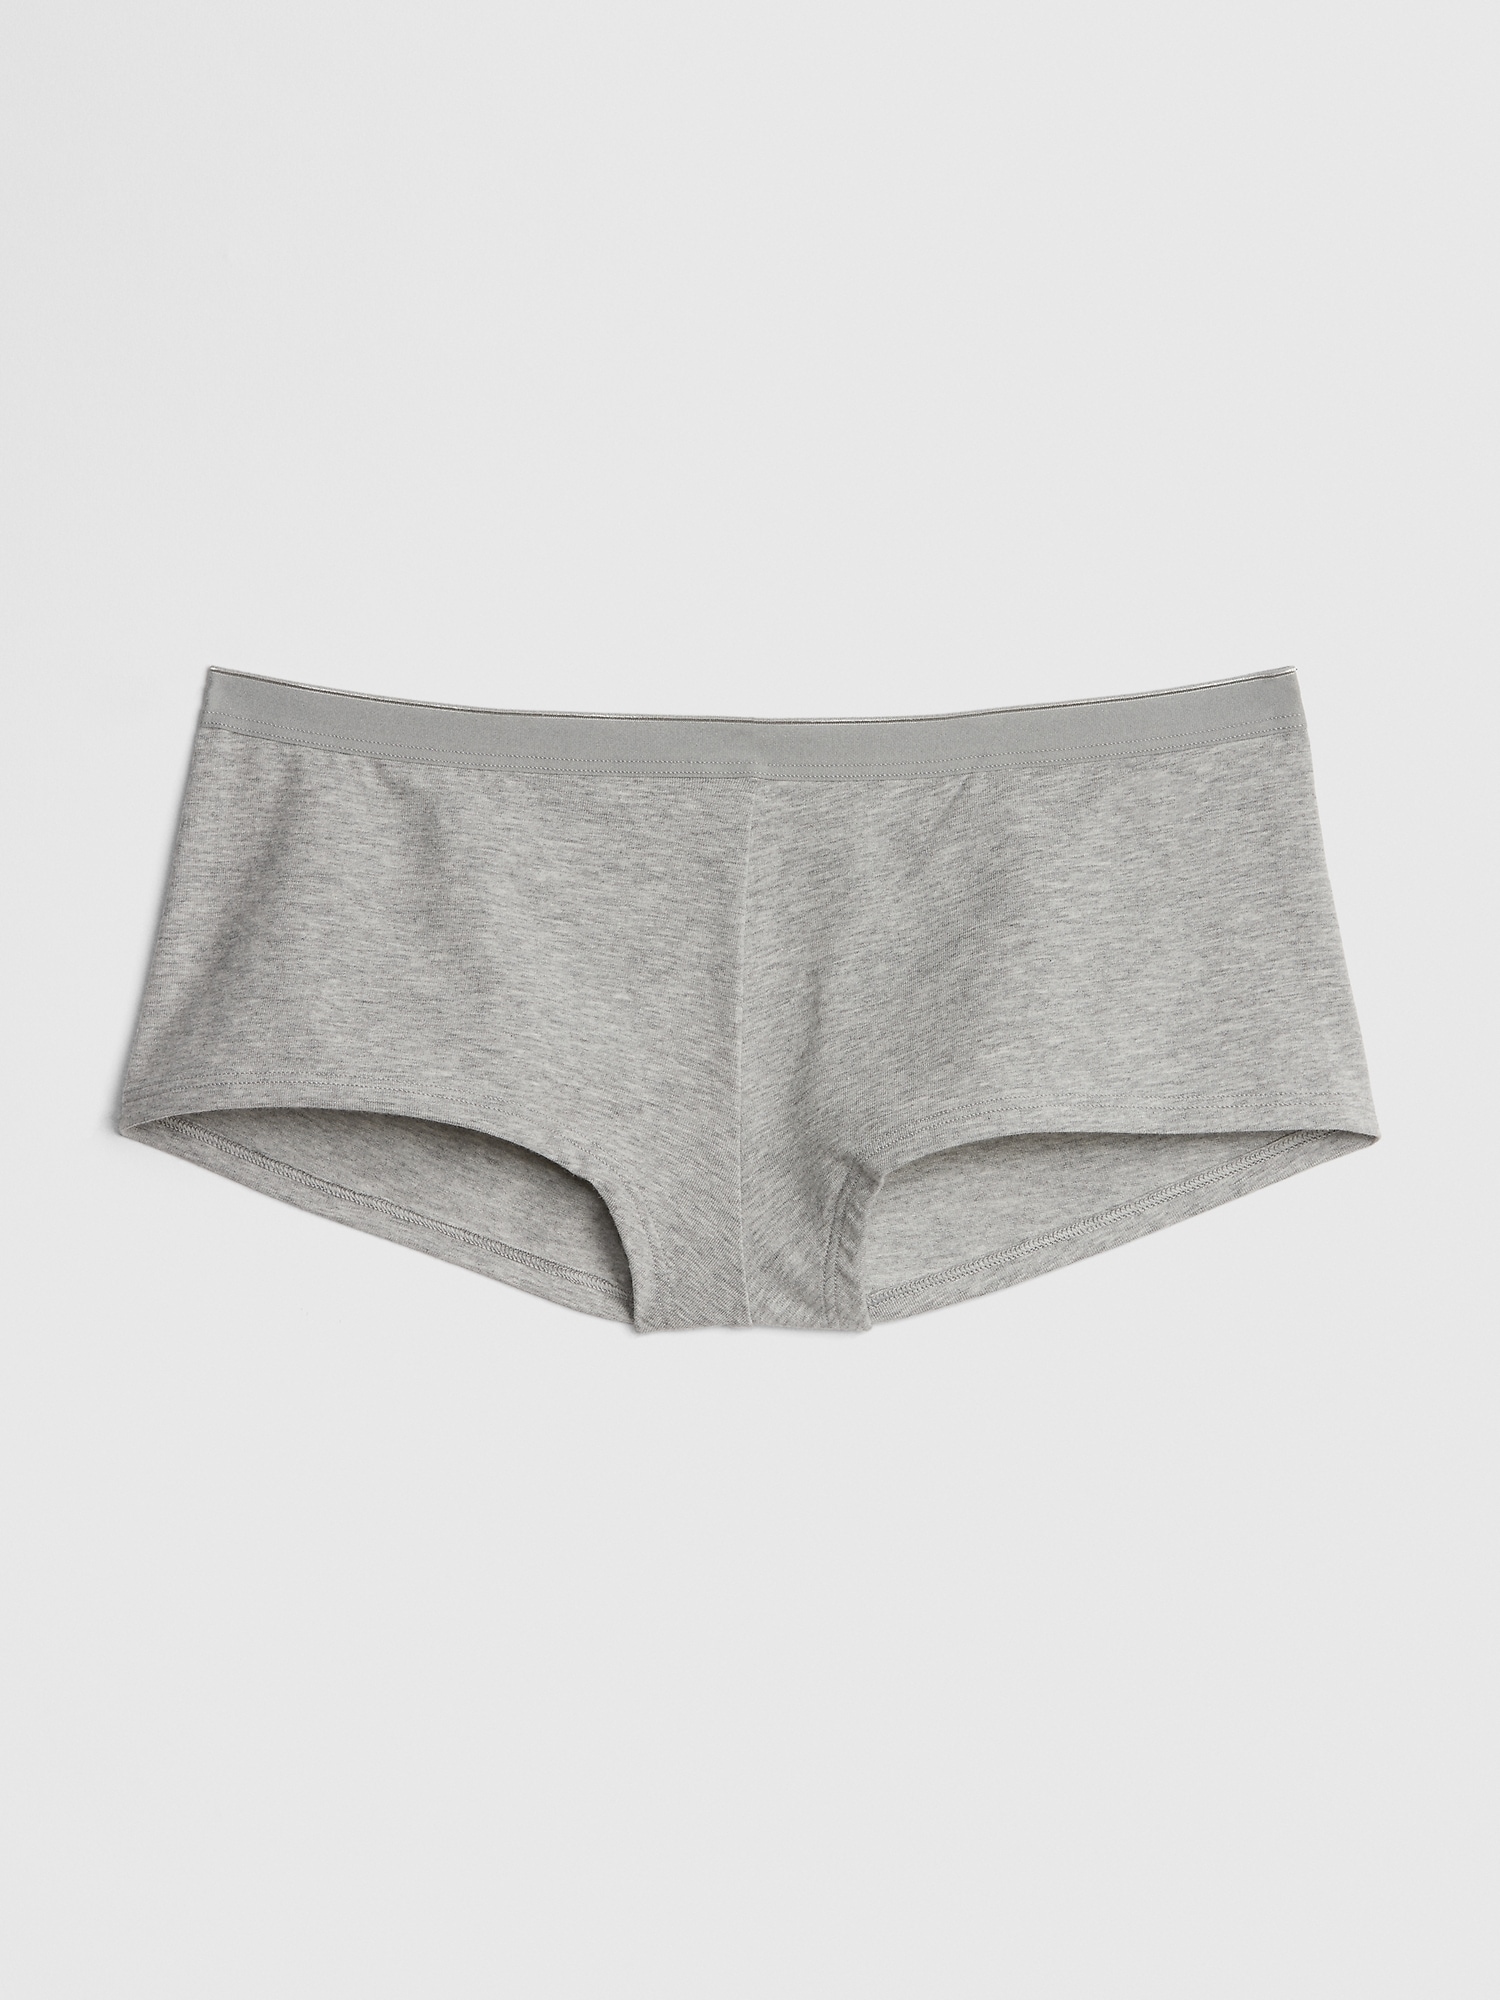 Buy Gap Stretch Cotton Mix Short Knickers from the Gap online shop